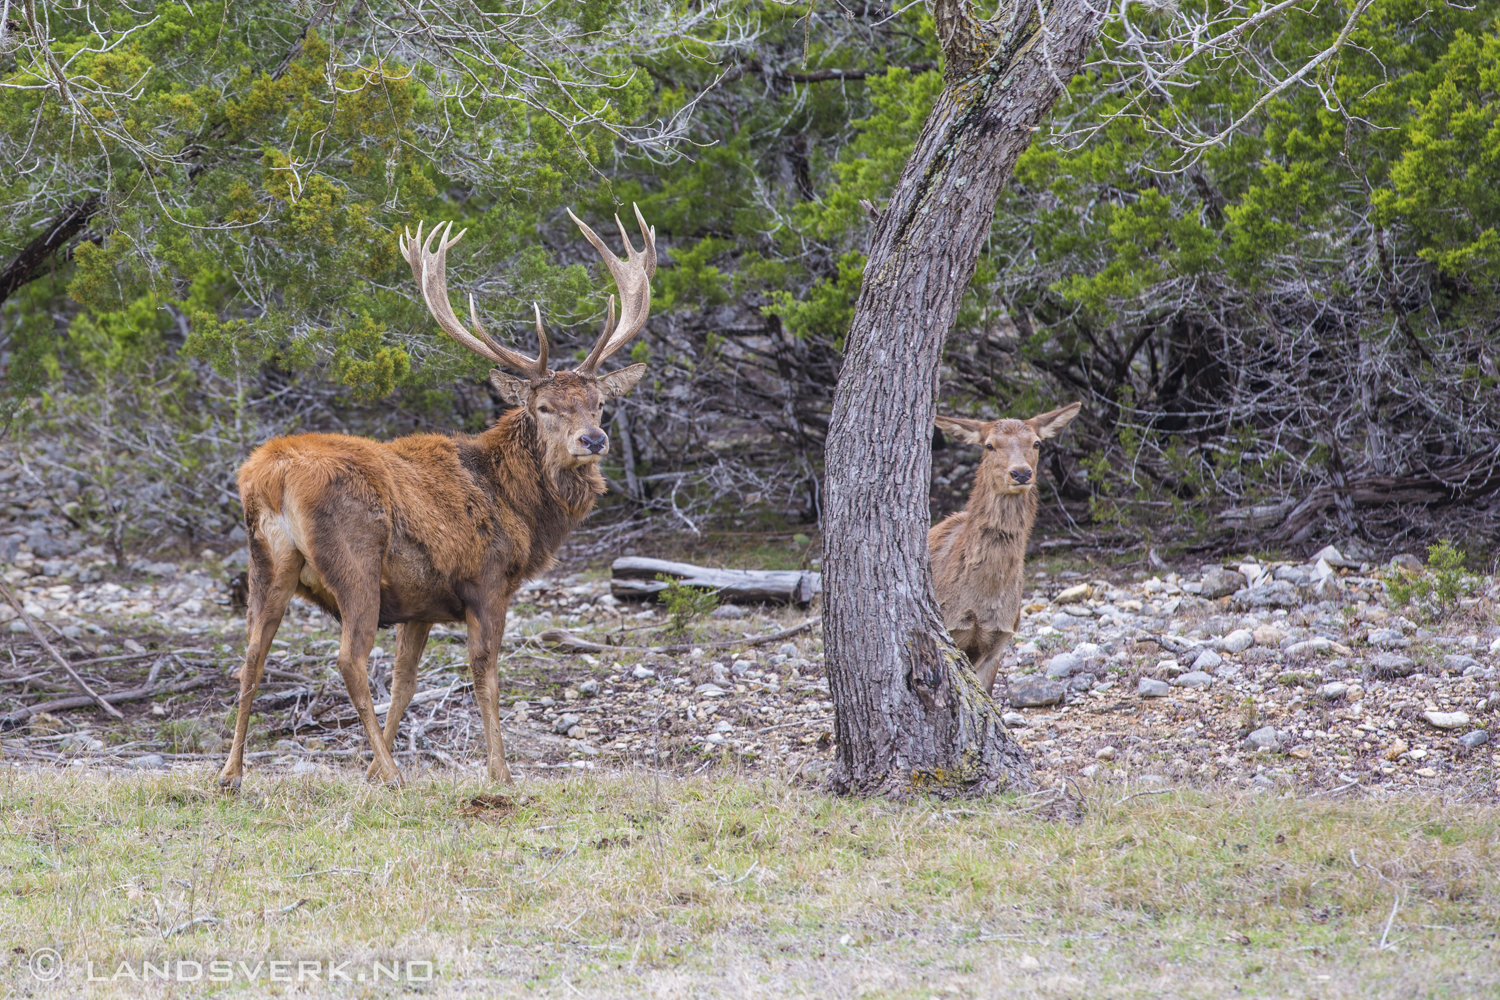 Wild deer. Texas Hill Country. 

(Canon EOS 5D Mark III / Canon EF 70-200mm f/2.8 L IS II USM)